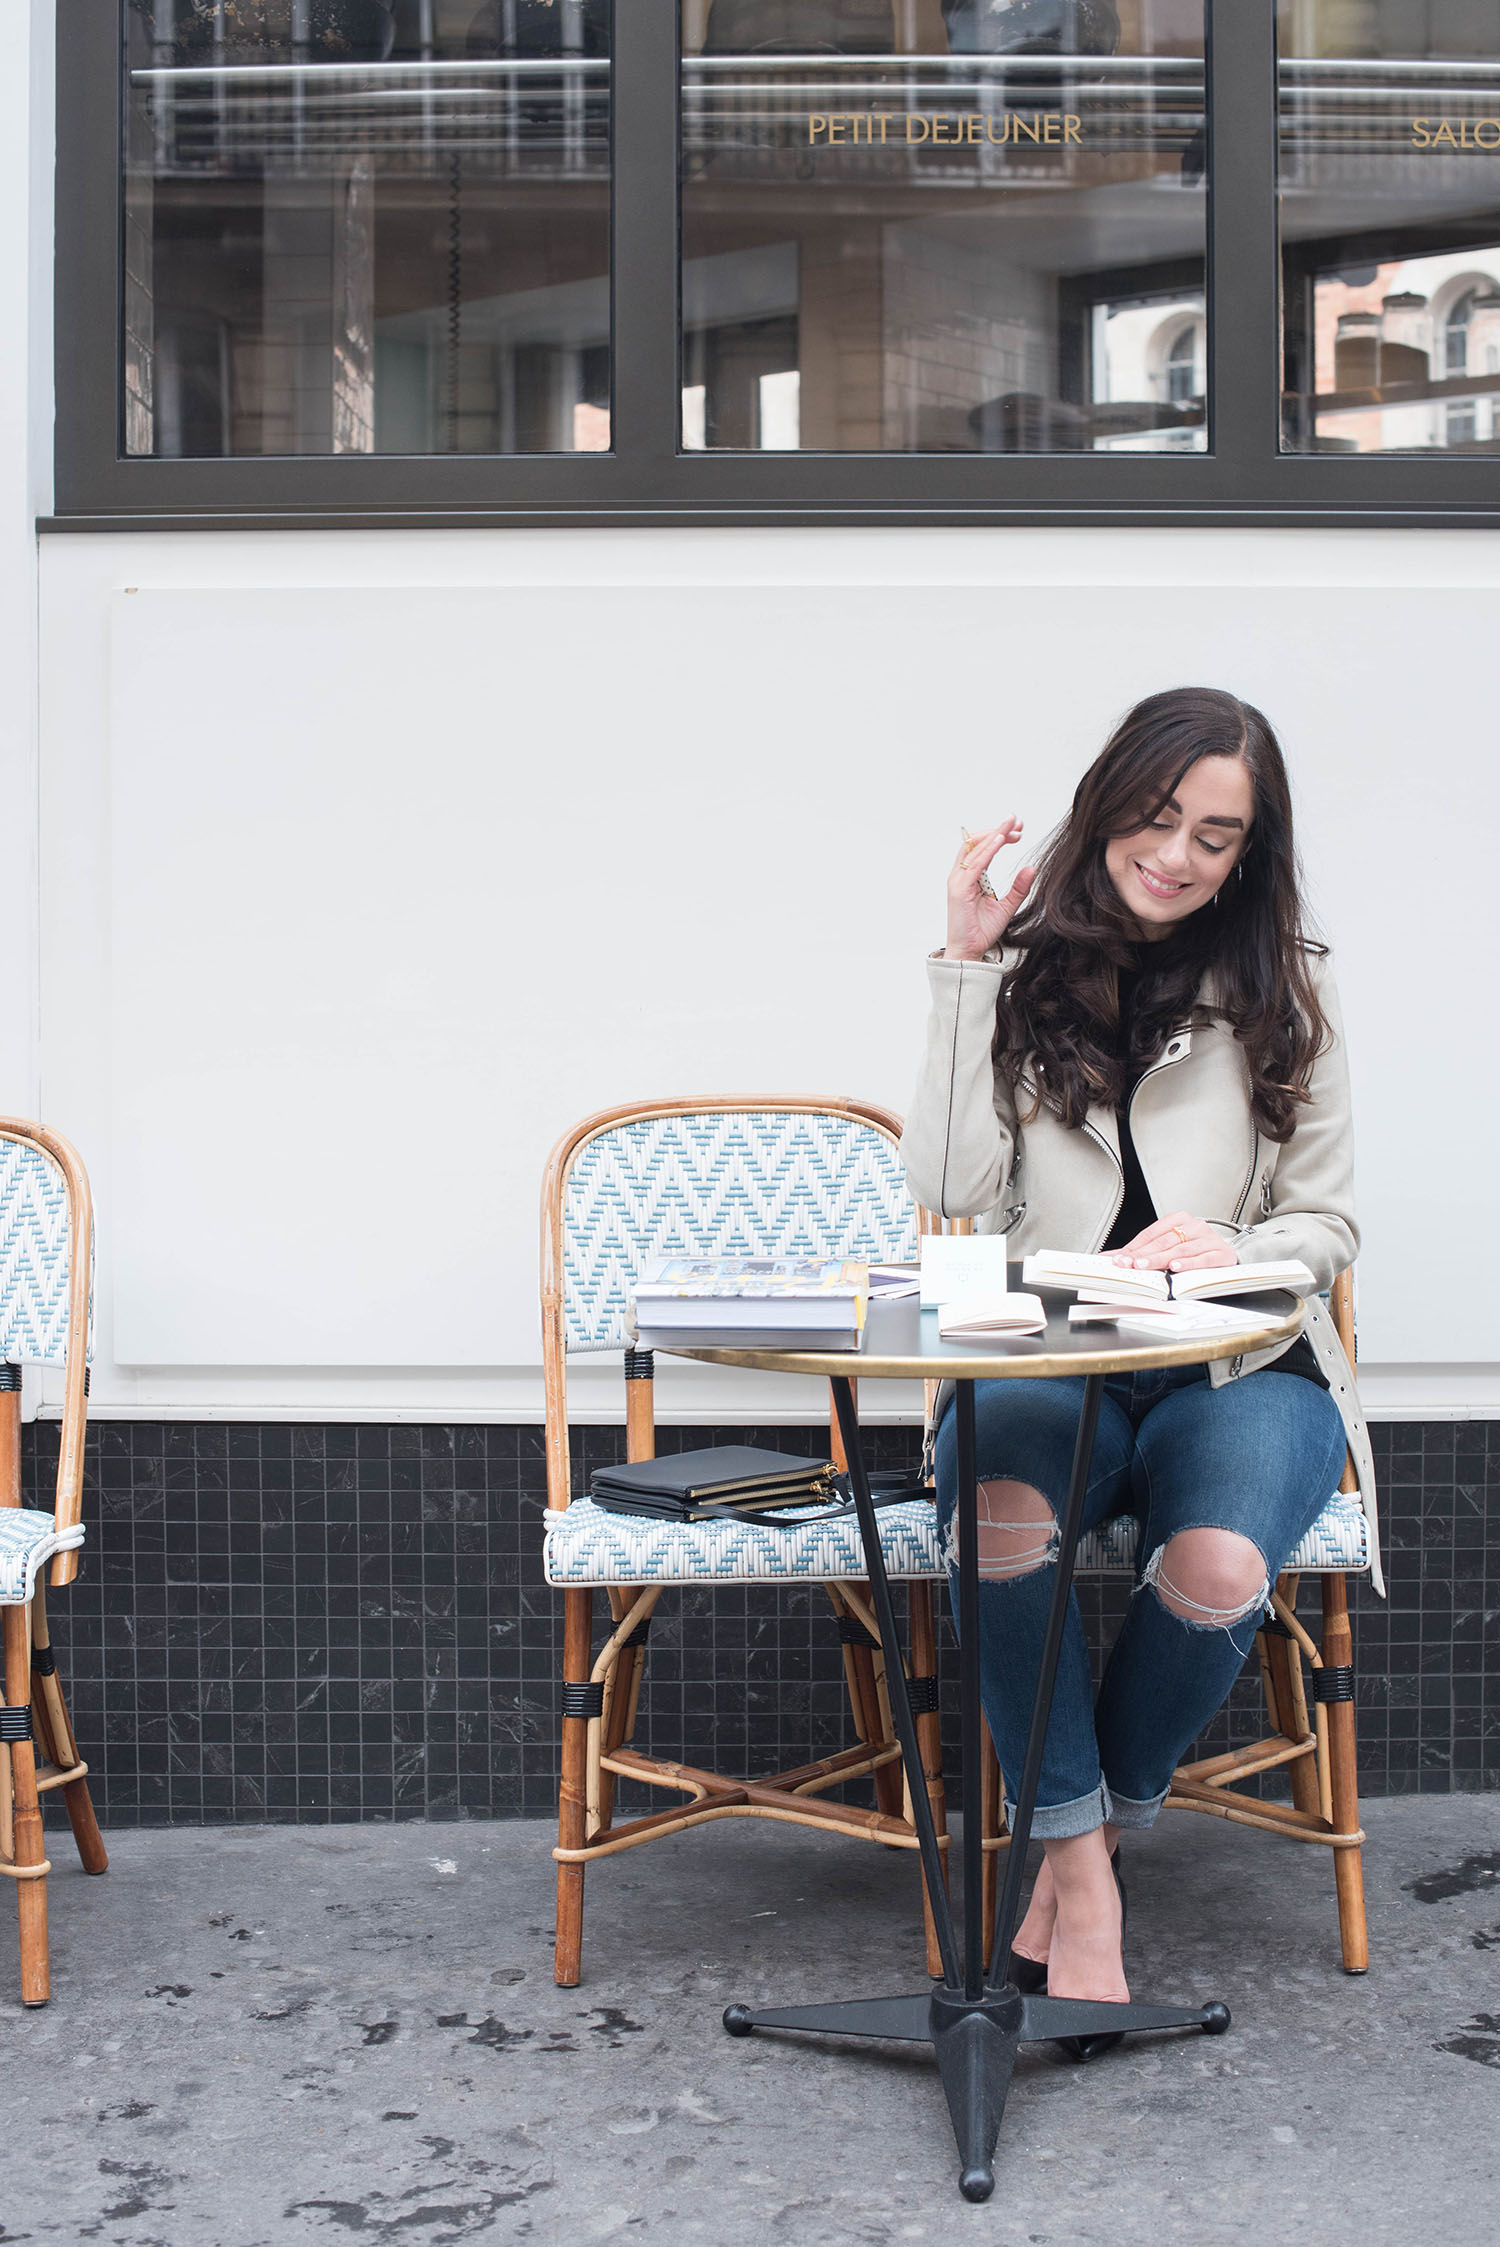 Winnipeg fashion blogger Cee Fardoe of Coco & Vera sits at cafe Maison Marie in Paris for an interview with The Plannerist, wearing a Zara suede jacket and Paige jeans